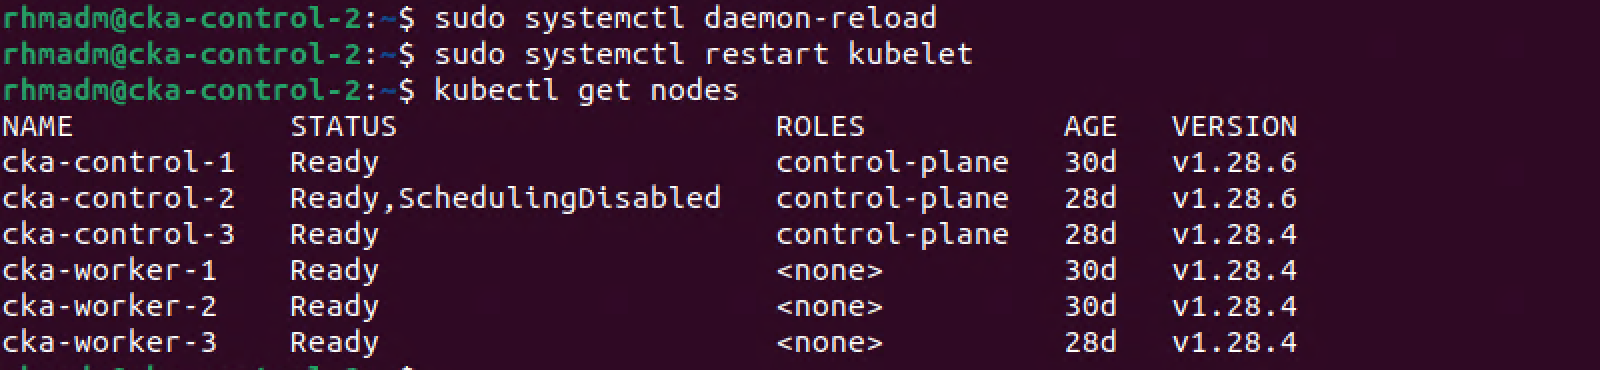 Restart kubelet and check cluster